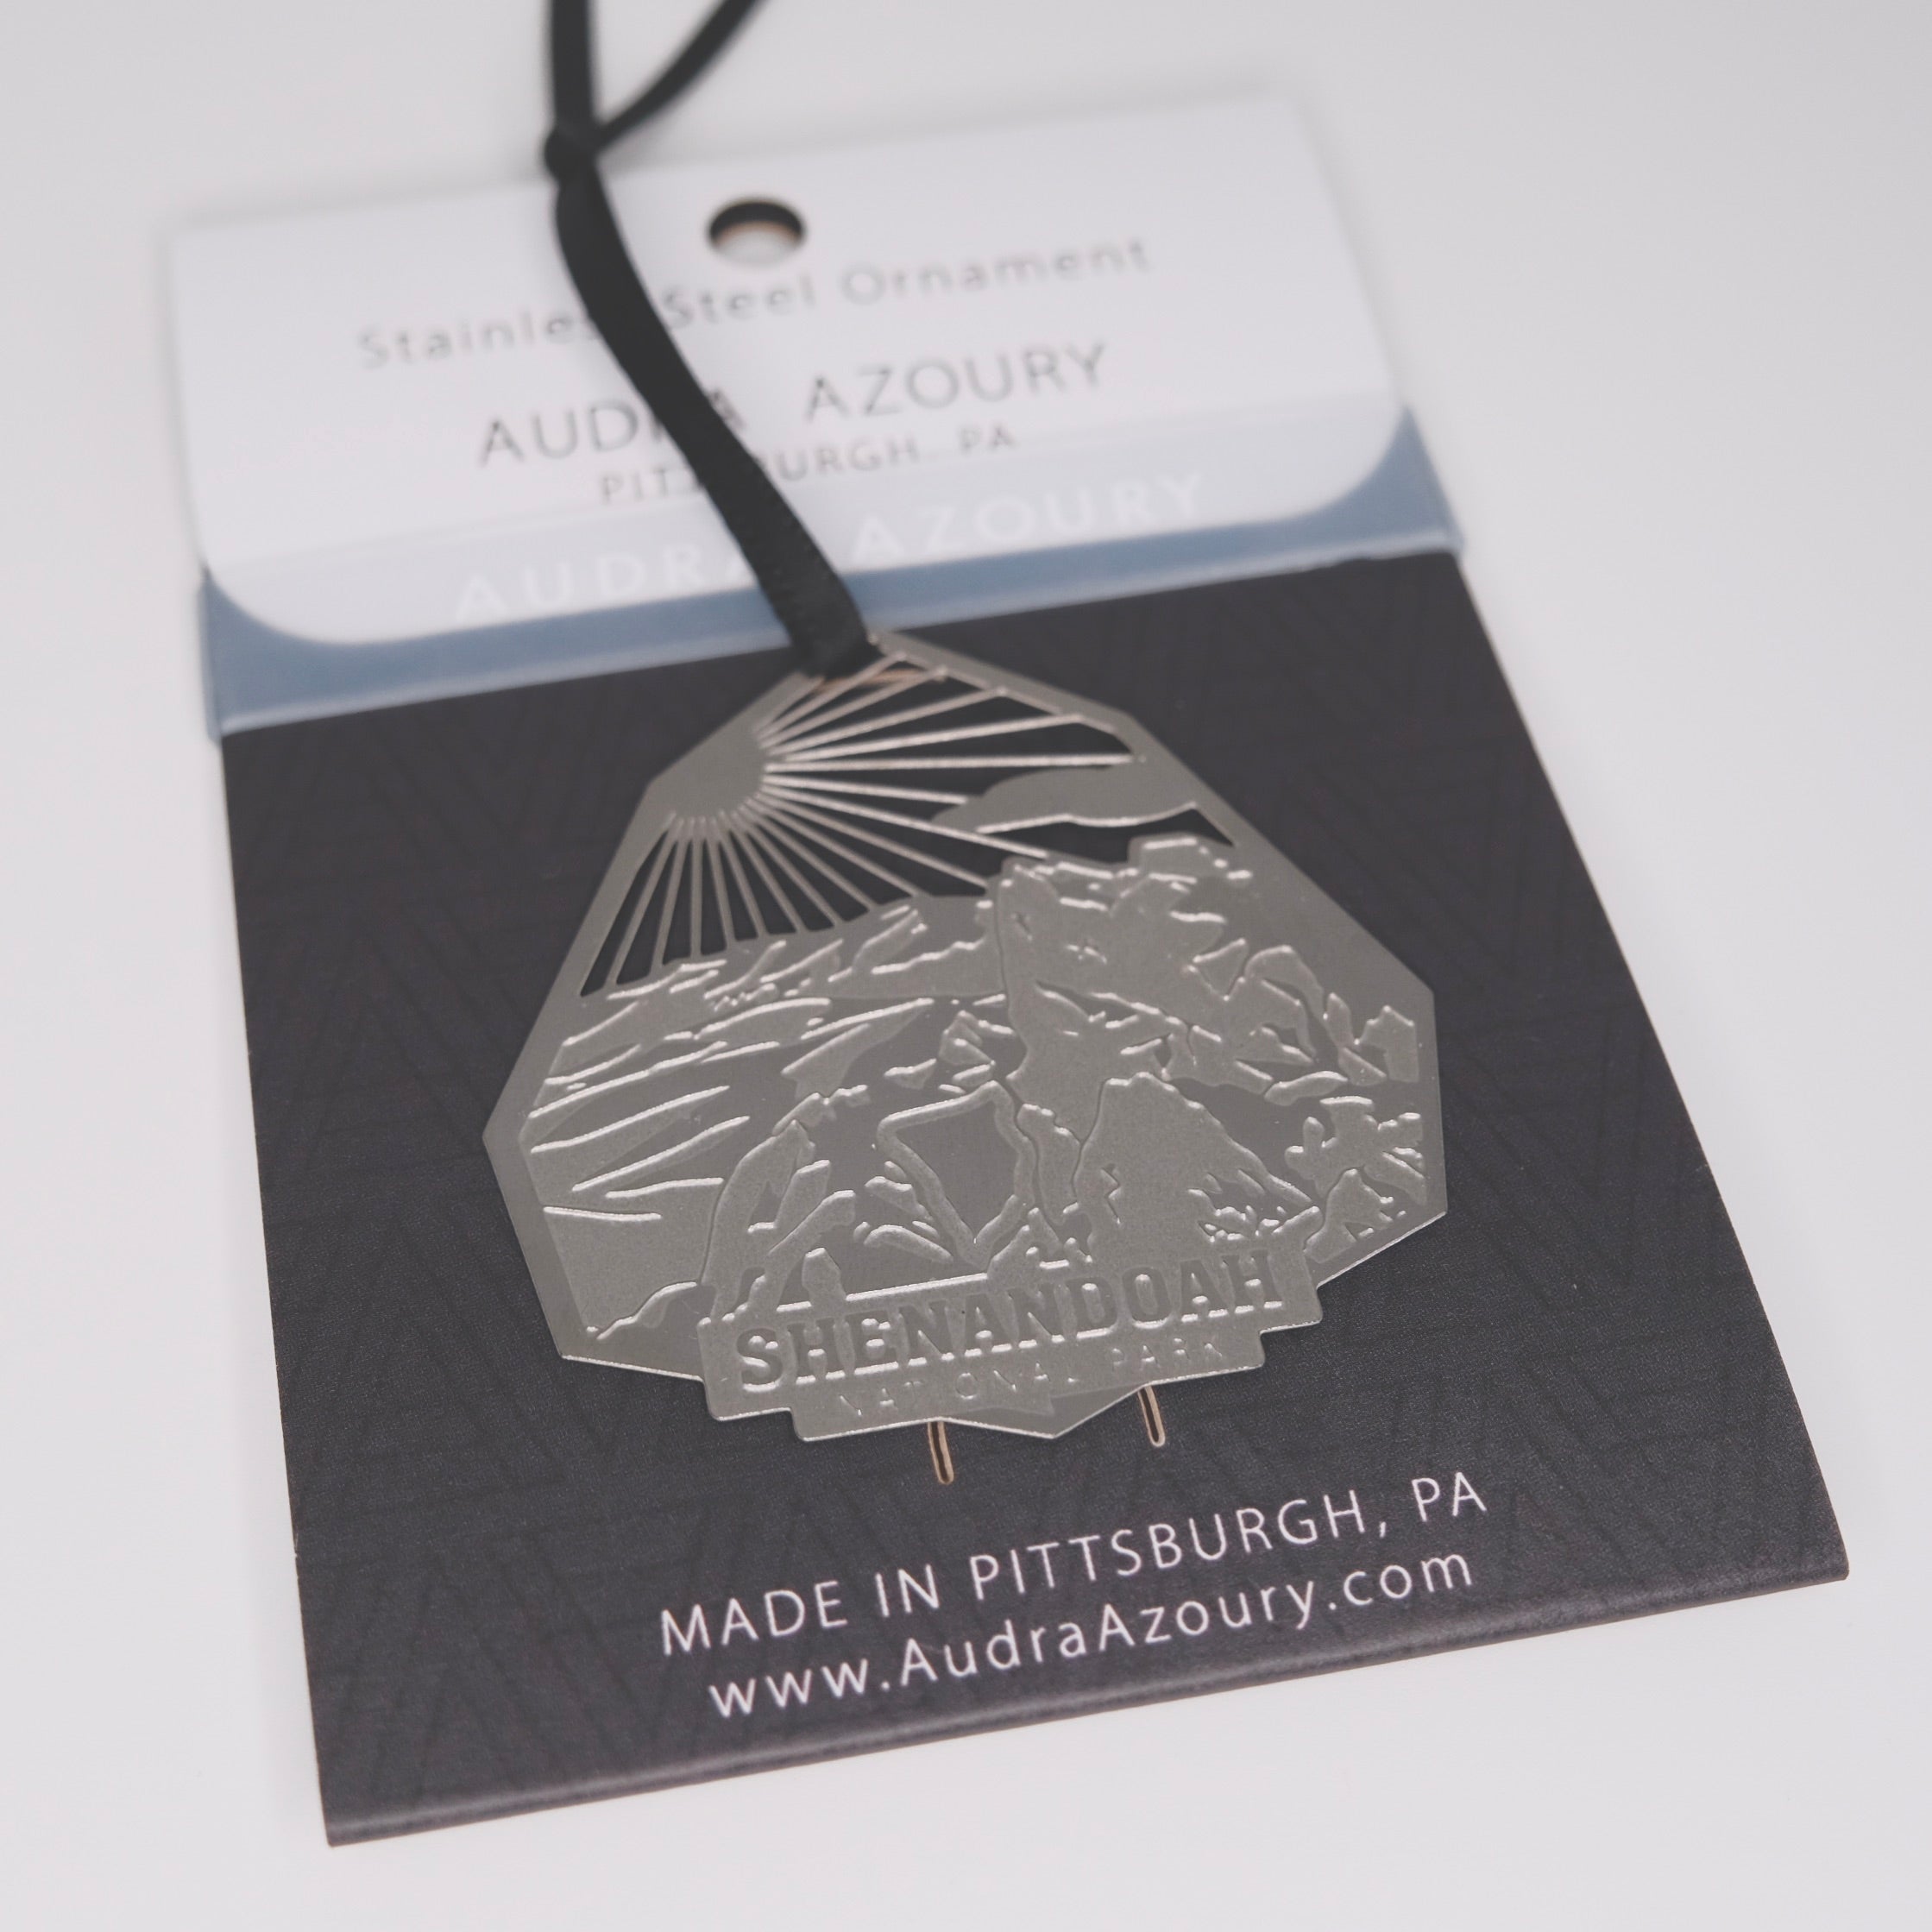 Shenandoah National Park ornament in stainless steel by Audra Azoury